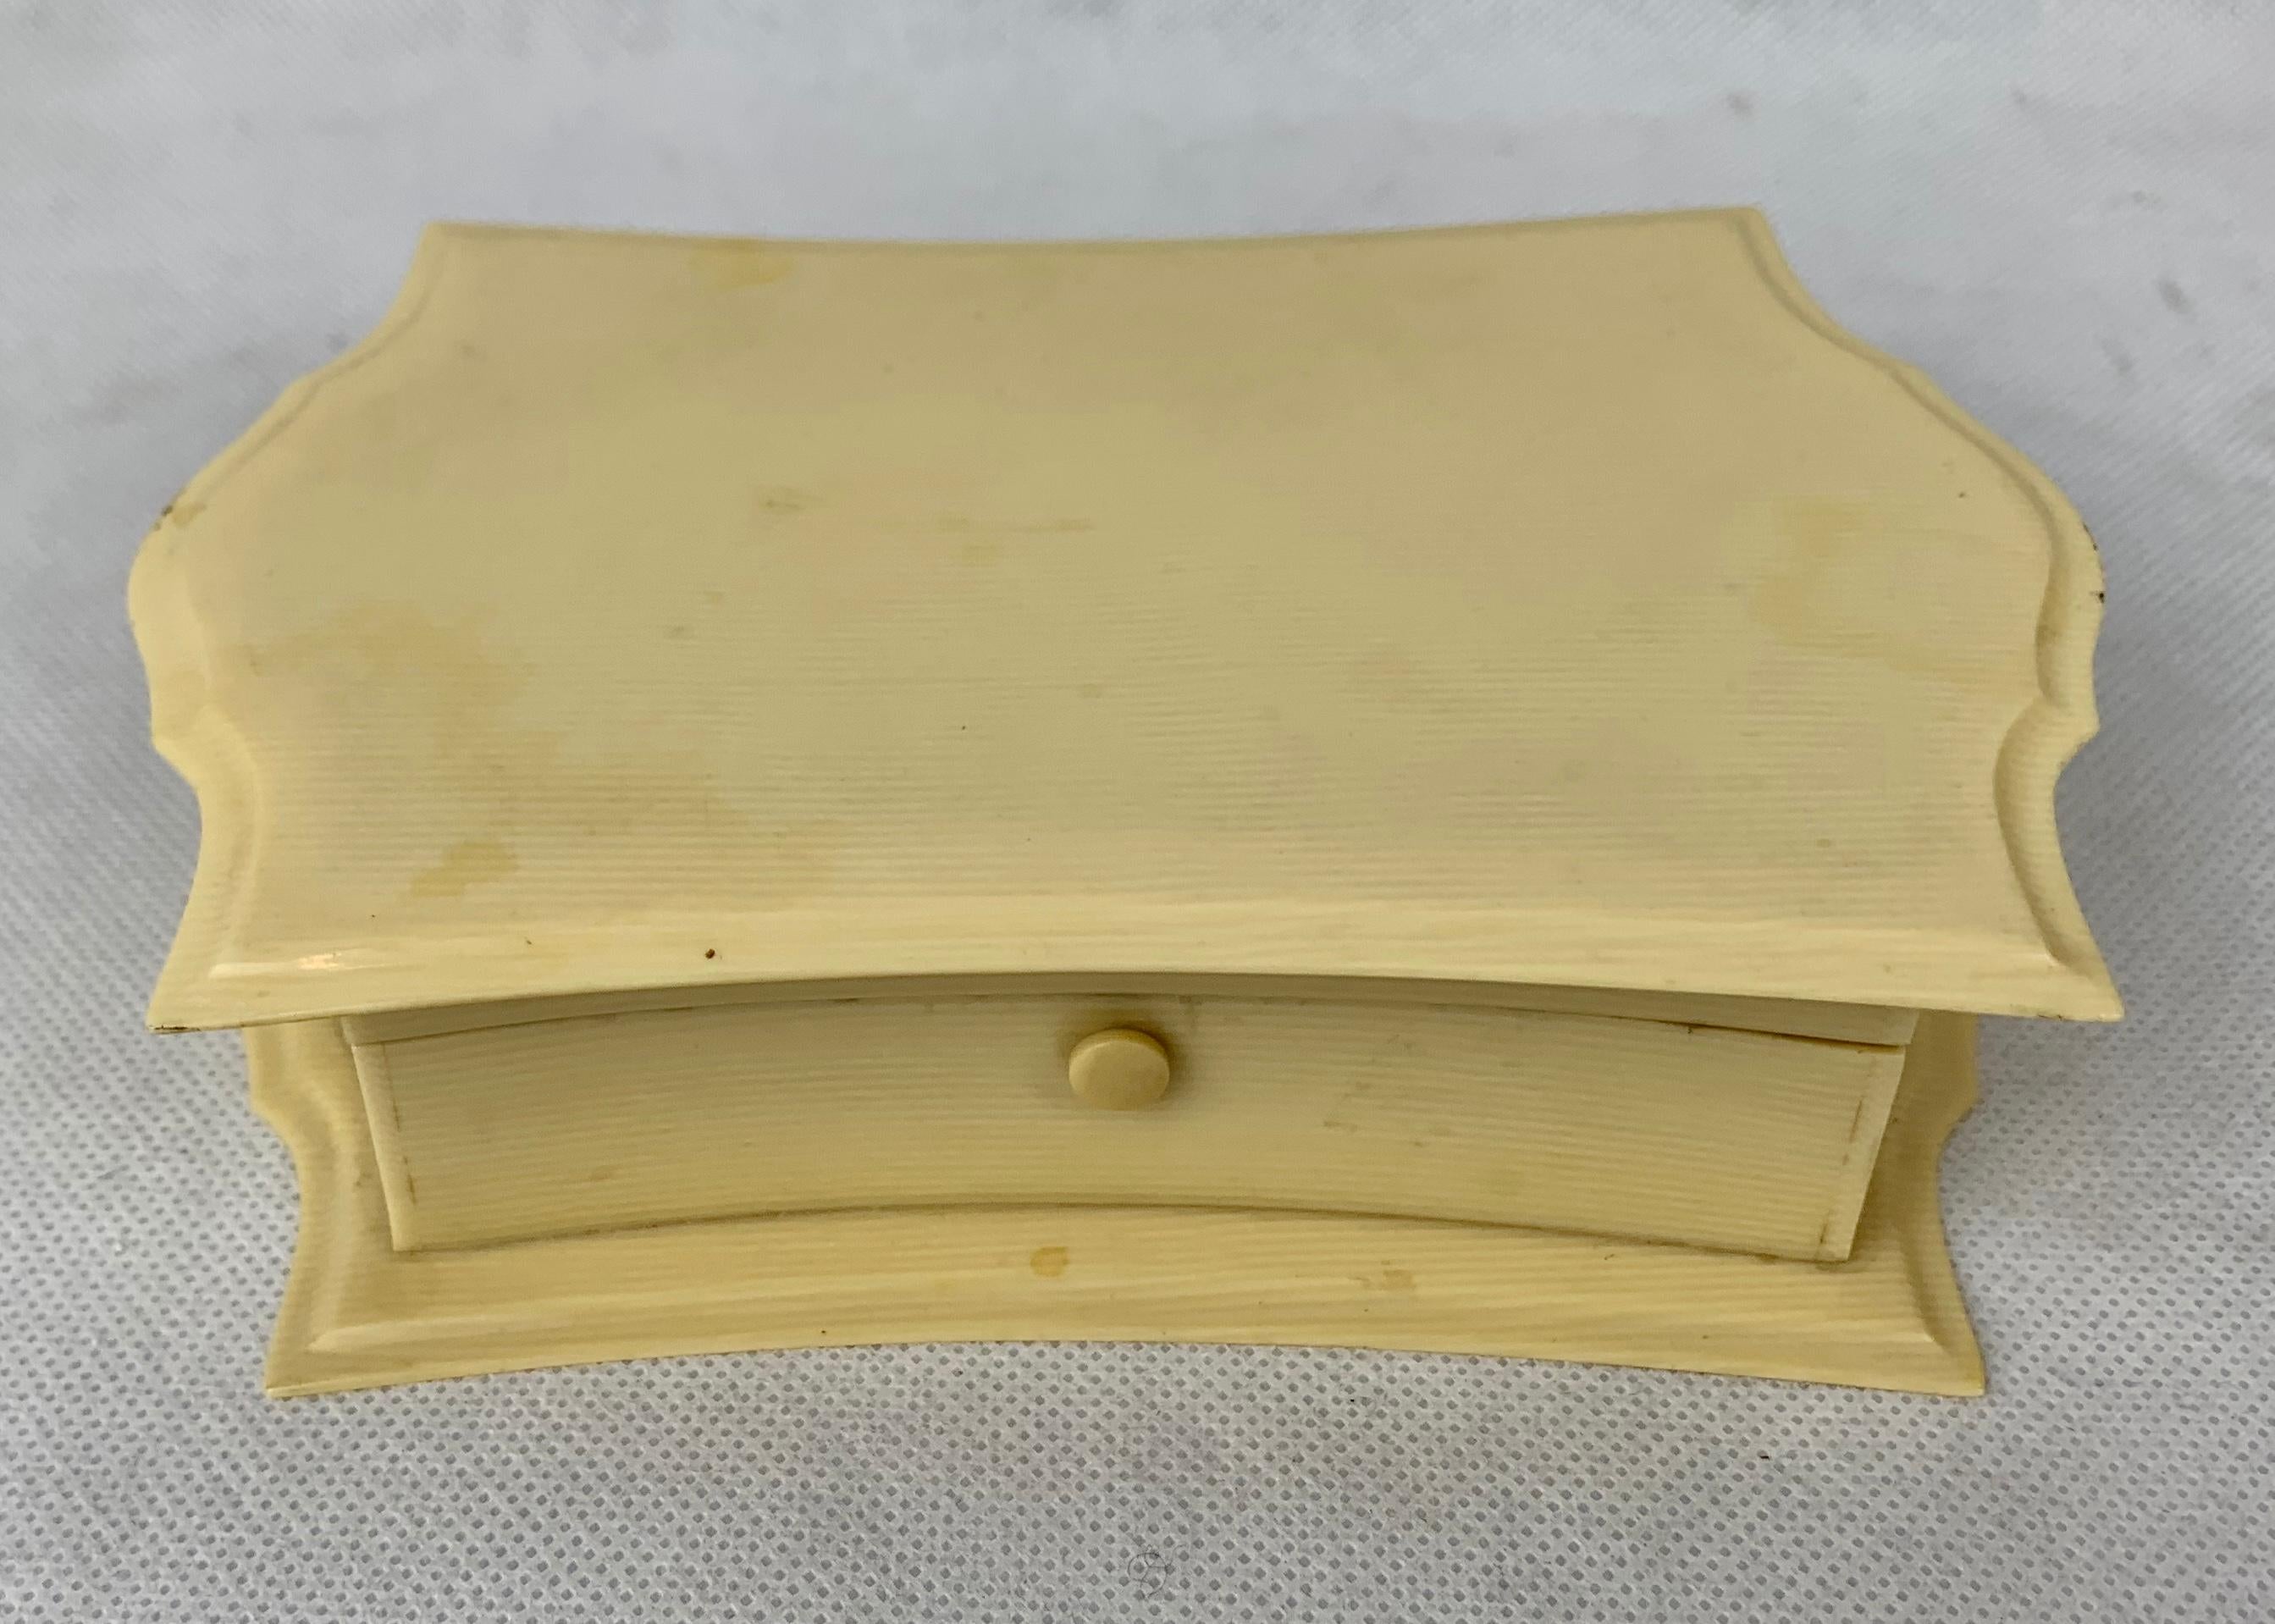 American DuBarry Ivorine Celluloid Jewelry Box with a Turtle Shaped Top For Sale